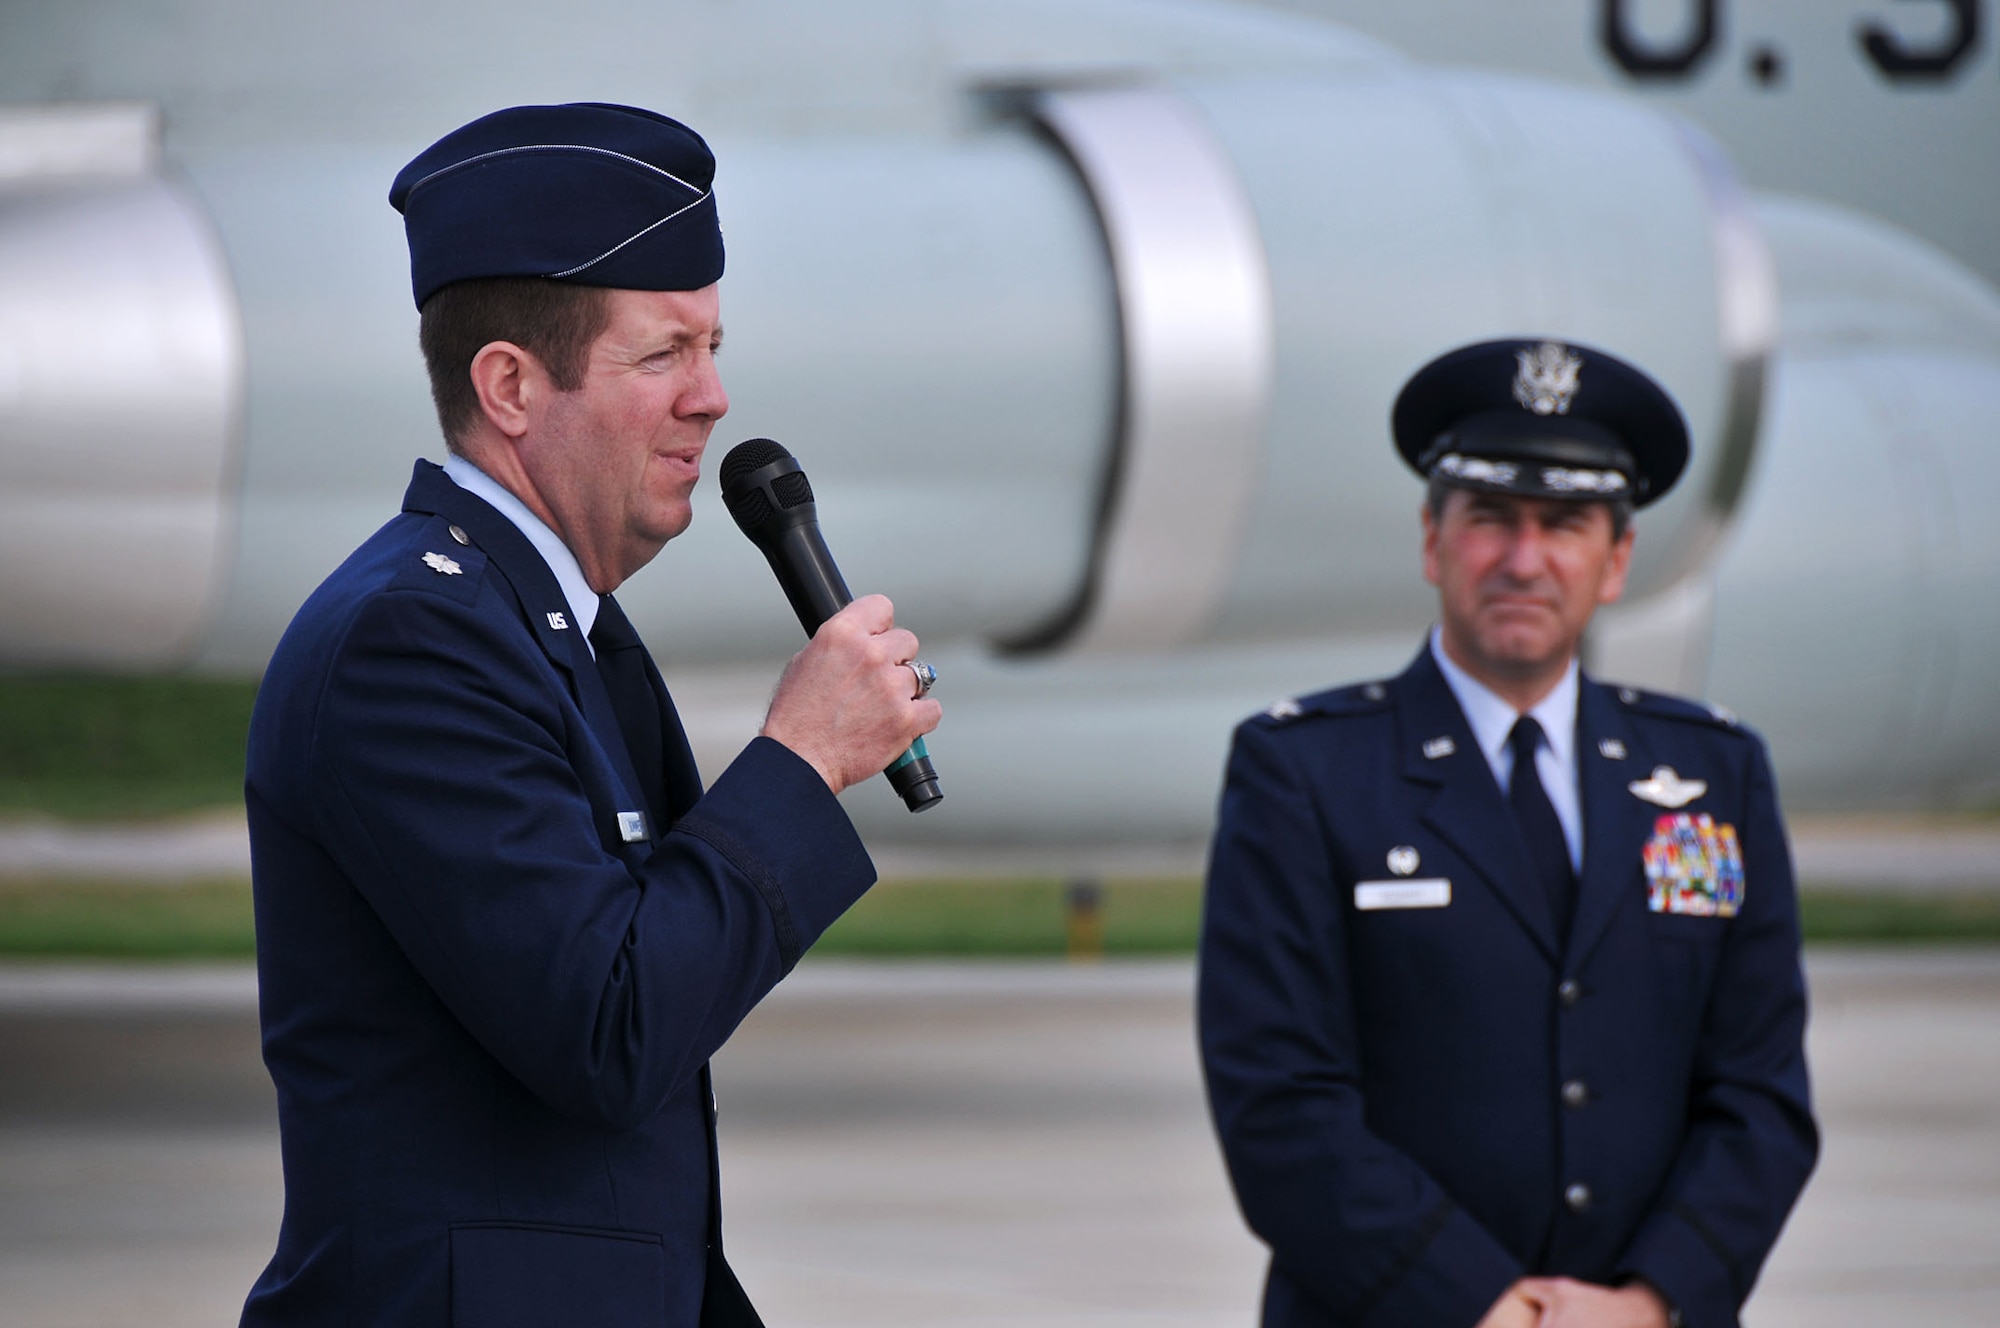 Lt. Col. Leslie Summers (left), a chaplain assigned to the 126th Air Refueling Wing, makes remarks at a memorial service at Scott AFB, Ill., while Col. Pete Nezamis, Commander, 126th Air Refueling Wing, looks on. The ceremony commemorated the four Wing aircrew members who perished in an aircraft accident 30 years ago. Maj. William S. Dixon, Jr., Capt. Kenneth L. Herrick, Capt. Robert J. Nicosia and Master Sgt. Richard A. Crome were aboard a Illinois National Guard KC-135A "Stratotanker" while on a routine training mission when their plane exploded near Greenwood, Ill., on March 19, 1982. In addition, 23 members of the 928th Tactical Airlift Group, Air Force Reserves, who were passengers also lost their lives. (National Guard photo by Master Sgt. Ken Stephens)